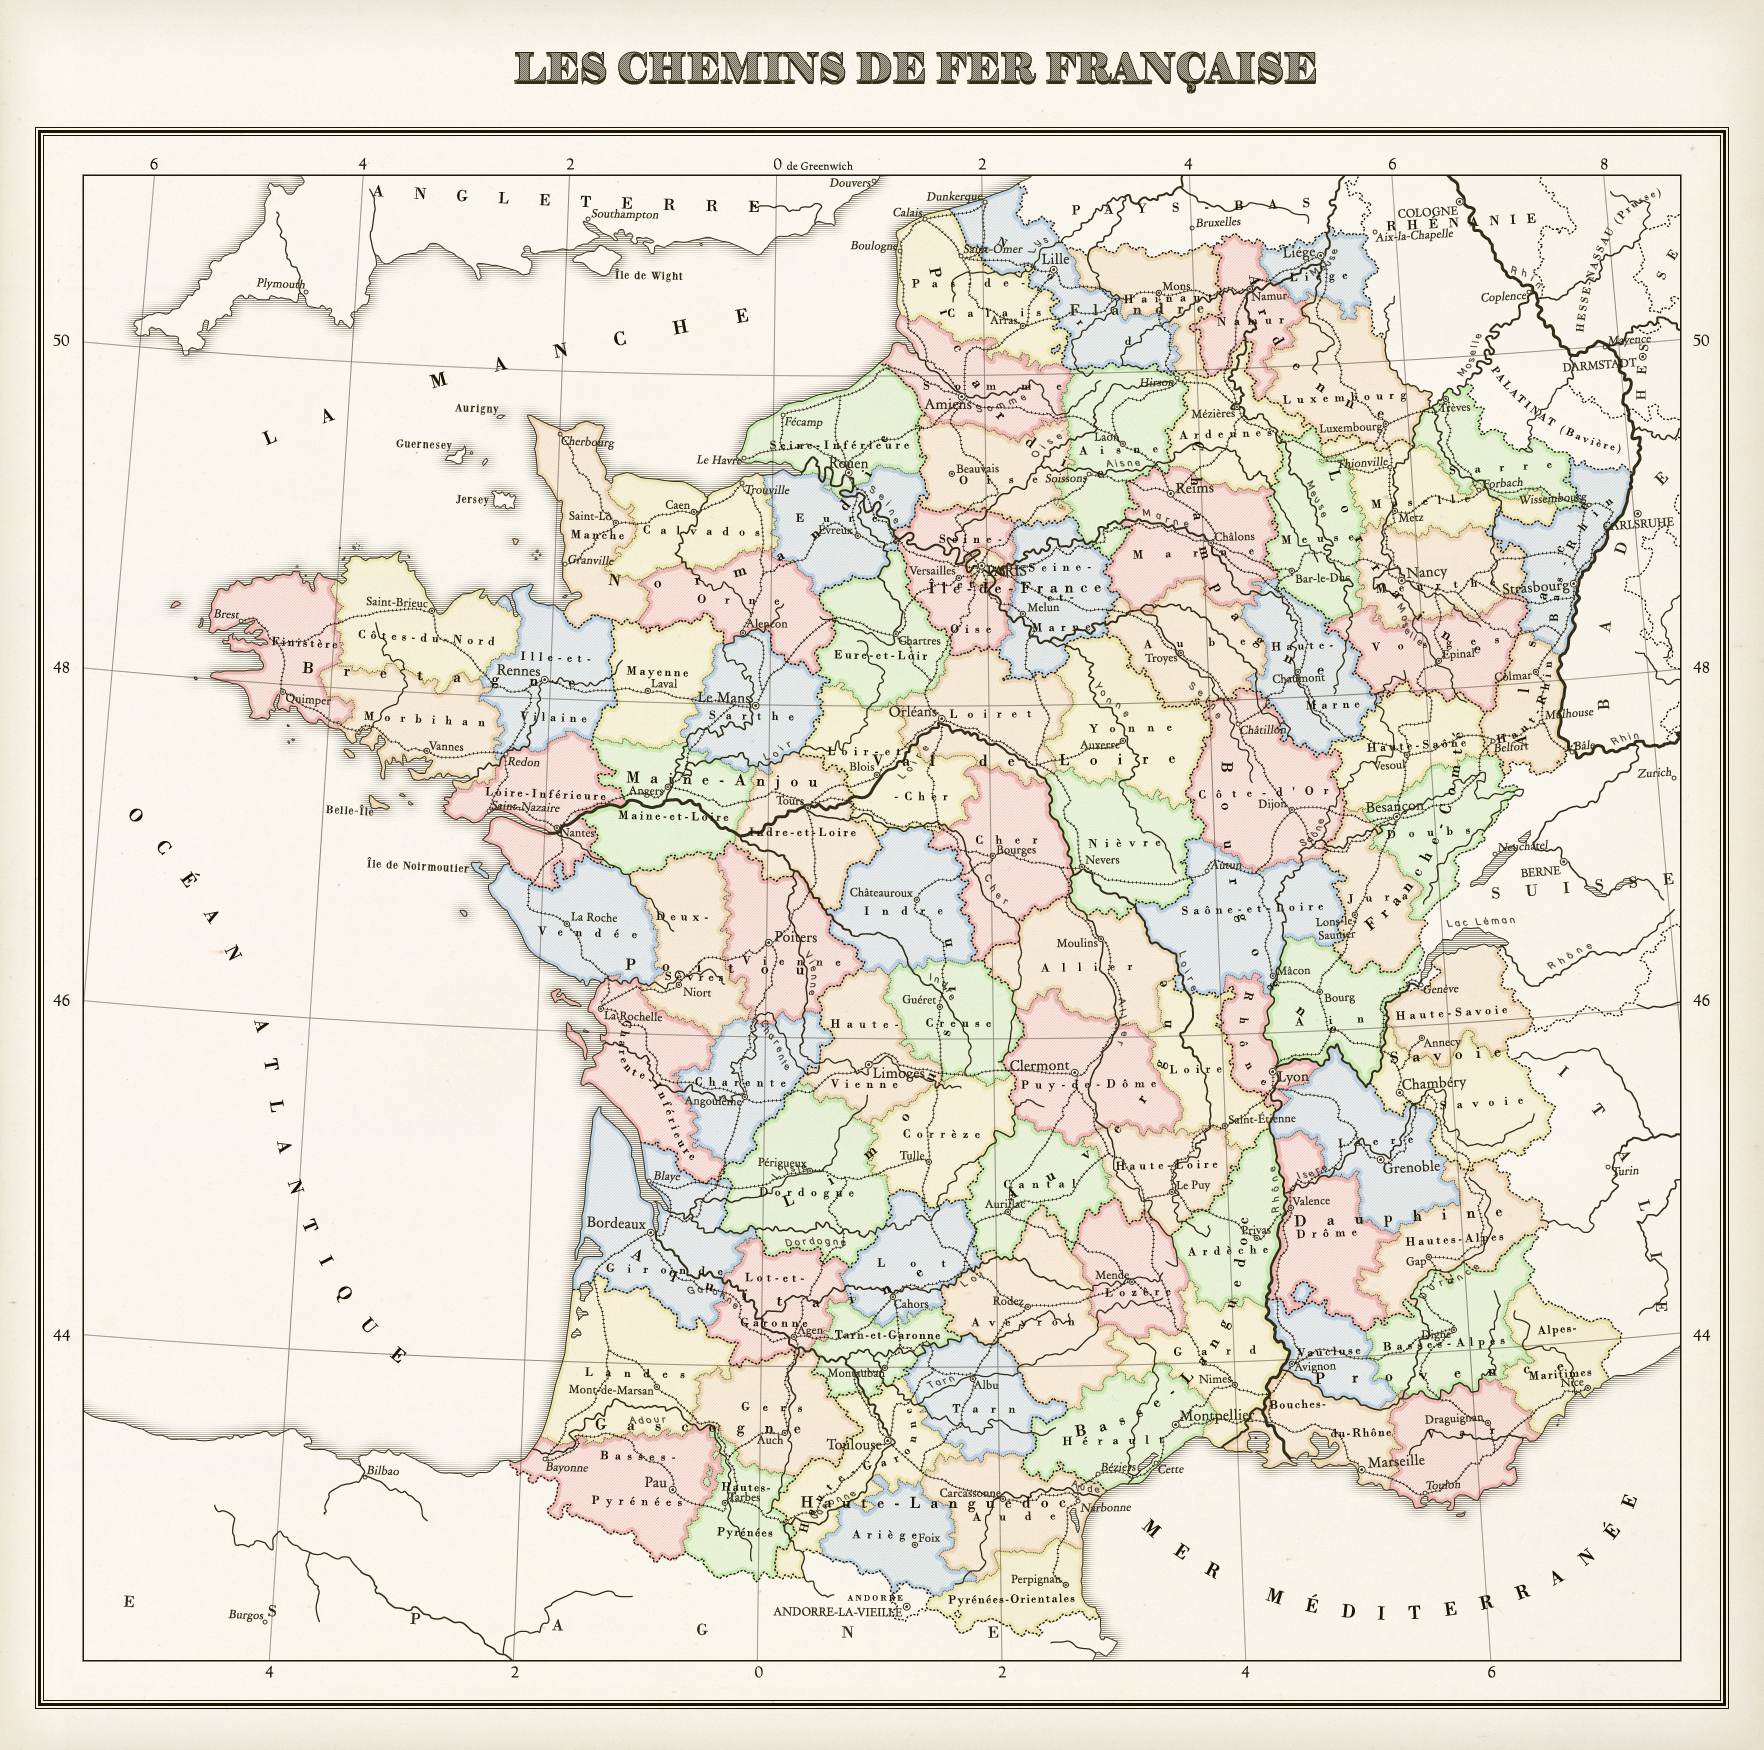 france__regions__provinces_and_railways_by_1blomma-d5kp86r.jpg